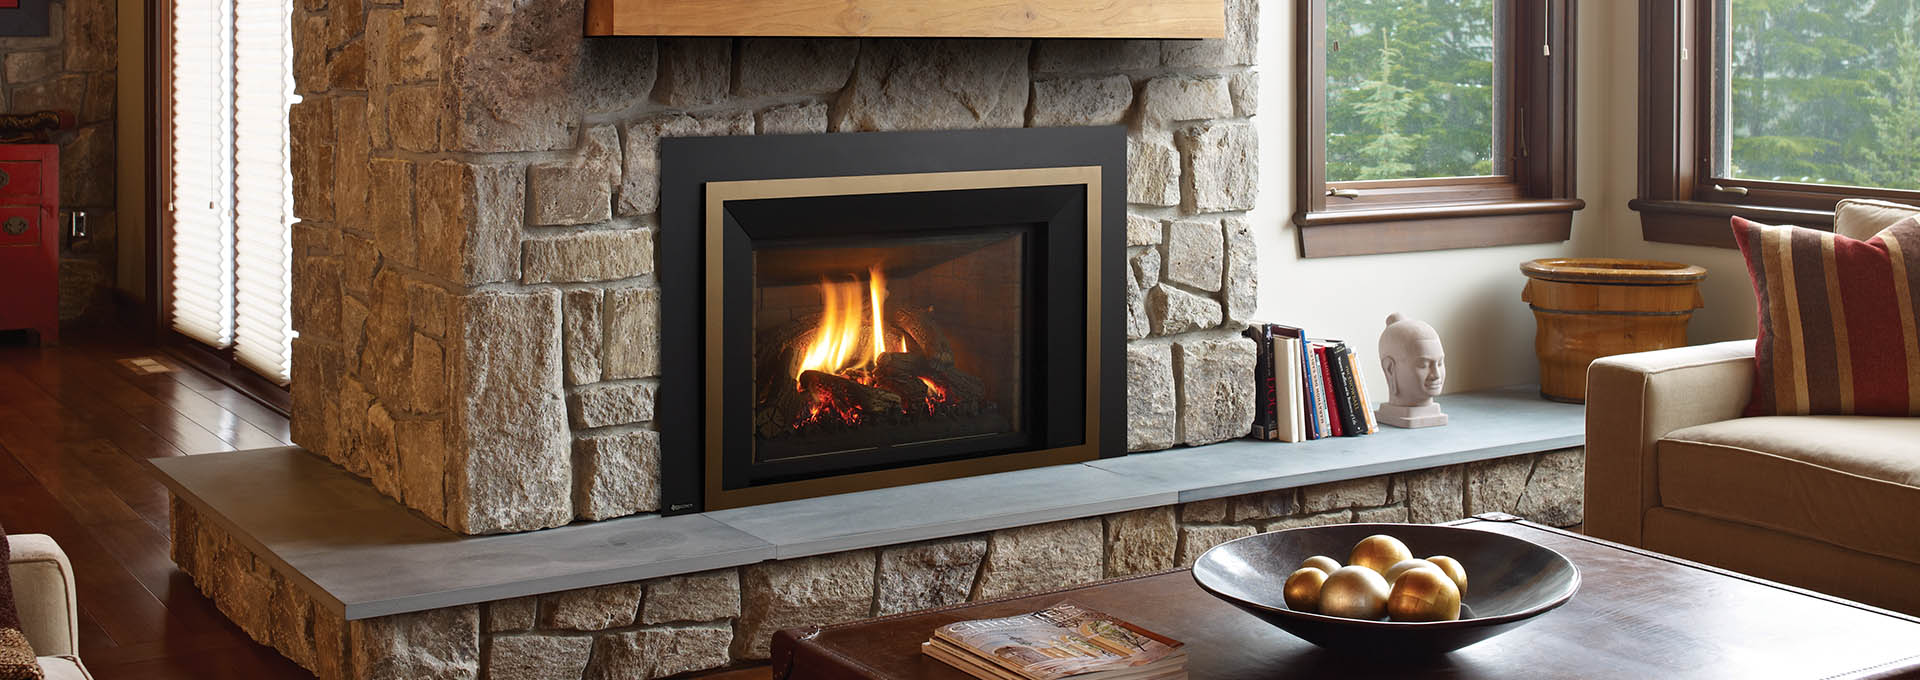 Regency LR16E Gas Insert with stone surround and wood mantle